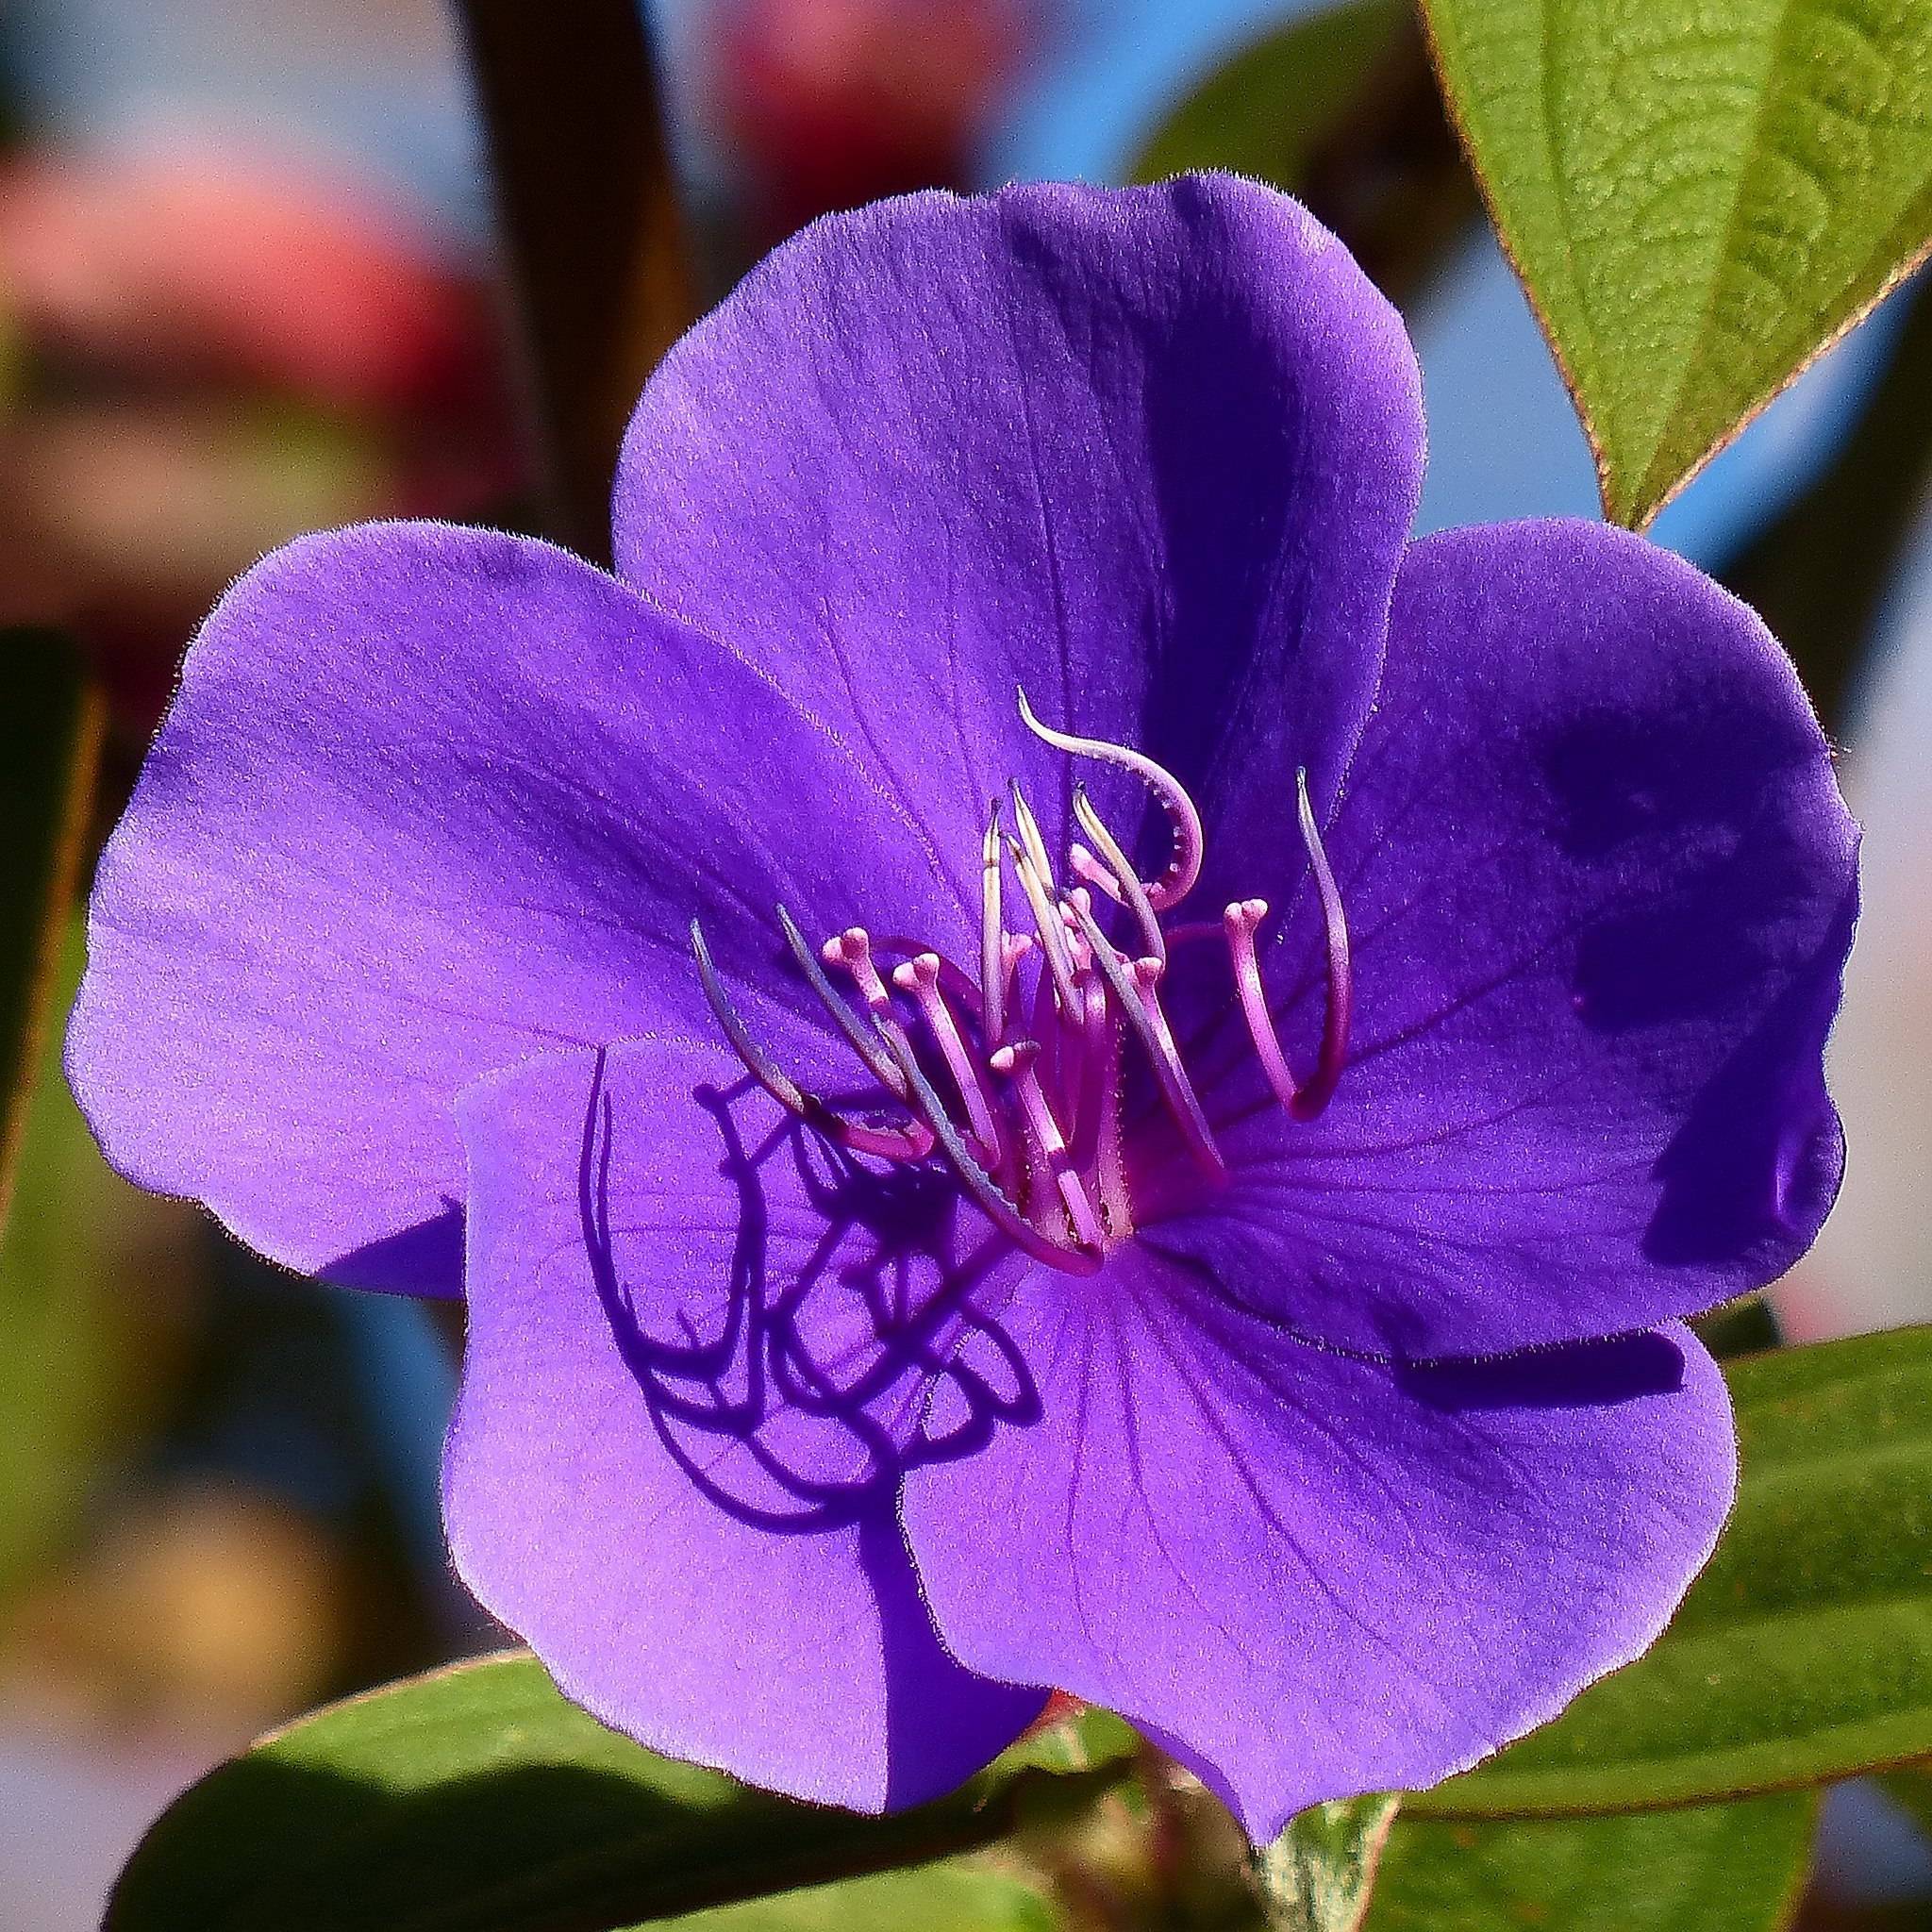 violet flowers with pink-purple stamens, brown stems and lime leaves
